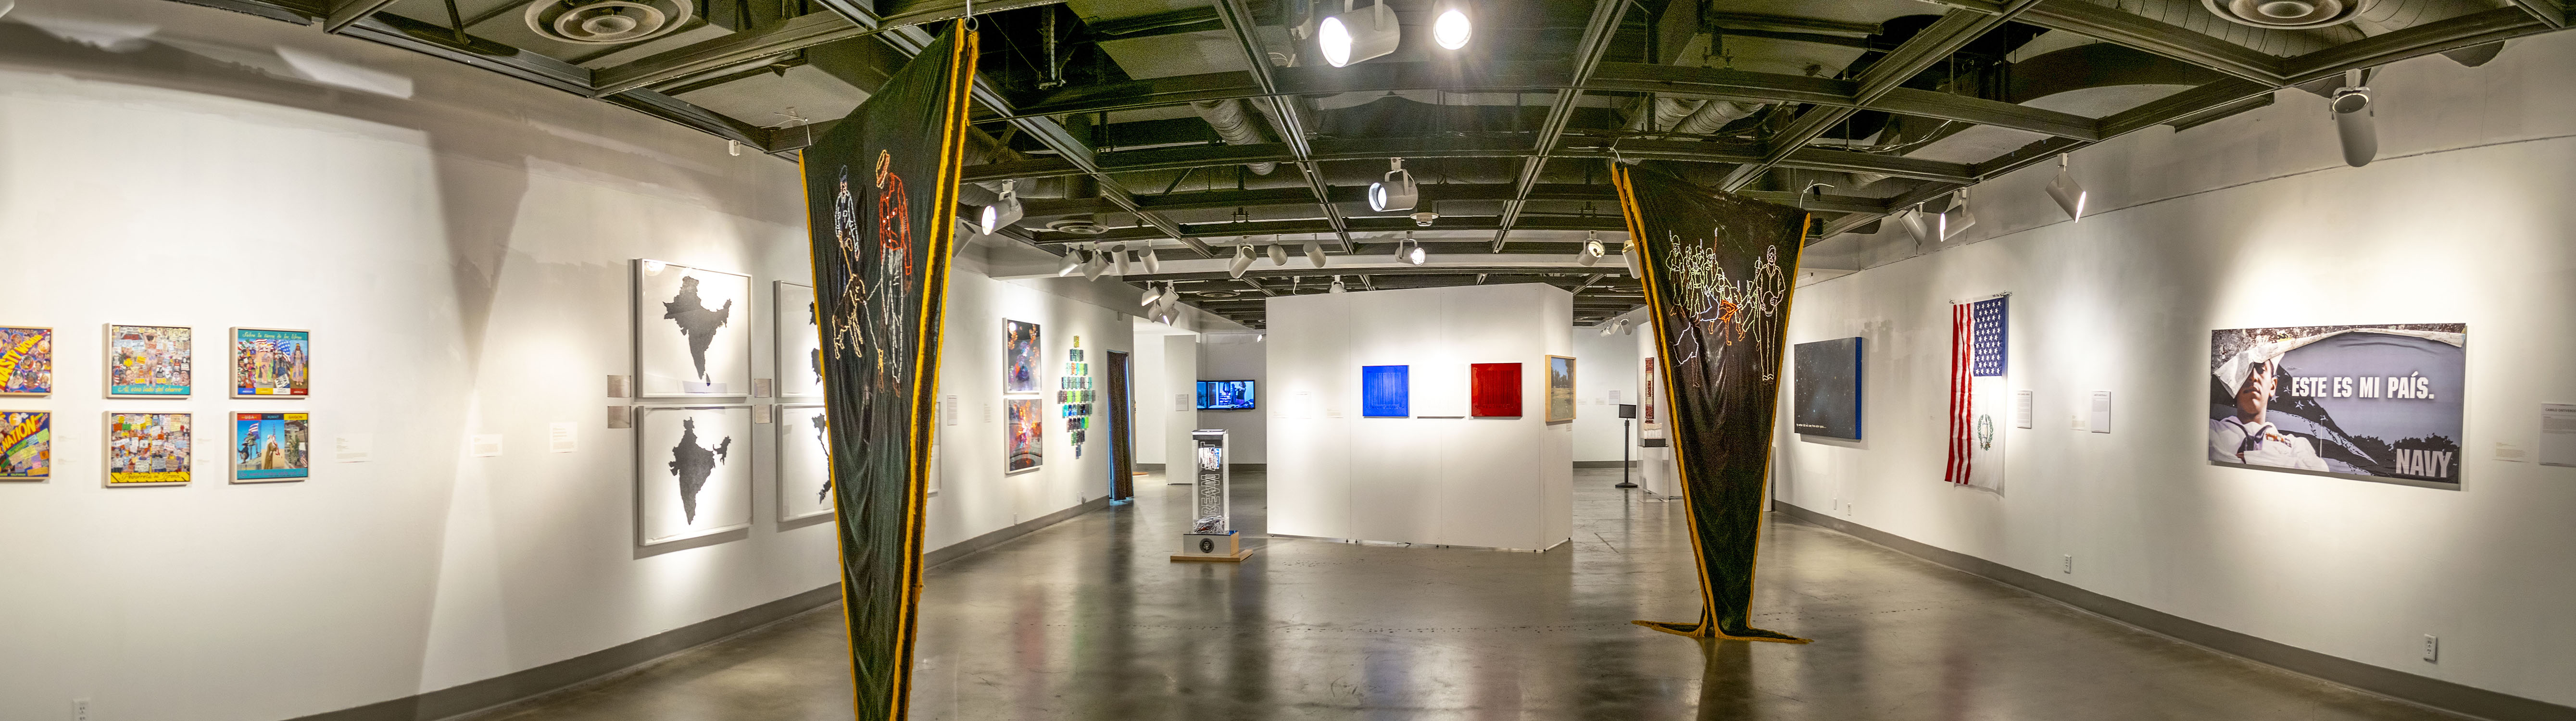 Back westside view of the gallery, Exhibition: Somewhere In Between, Nov 6, 2018 - Mar 17, 2019,  Co-curated by Michele Cairella Fillmore & Bia Gayotto, W. Keith & Janet Kellogg Art Gallery, Cal Poly Pomona.